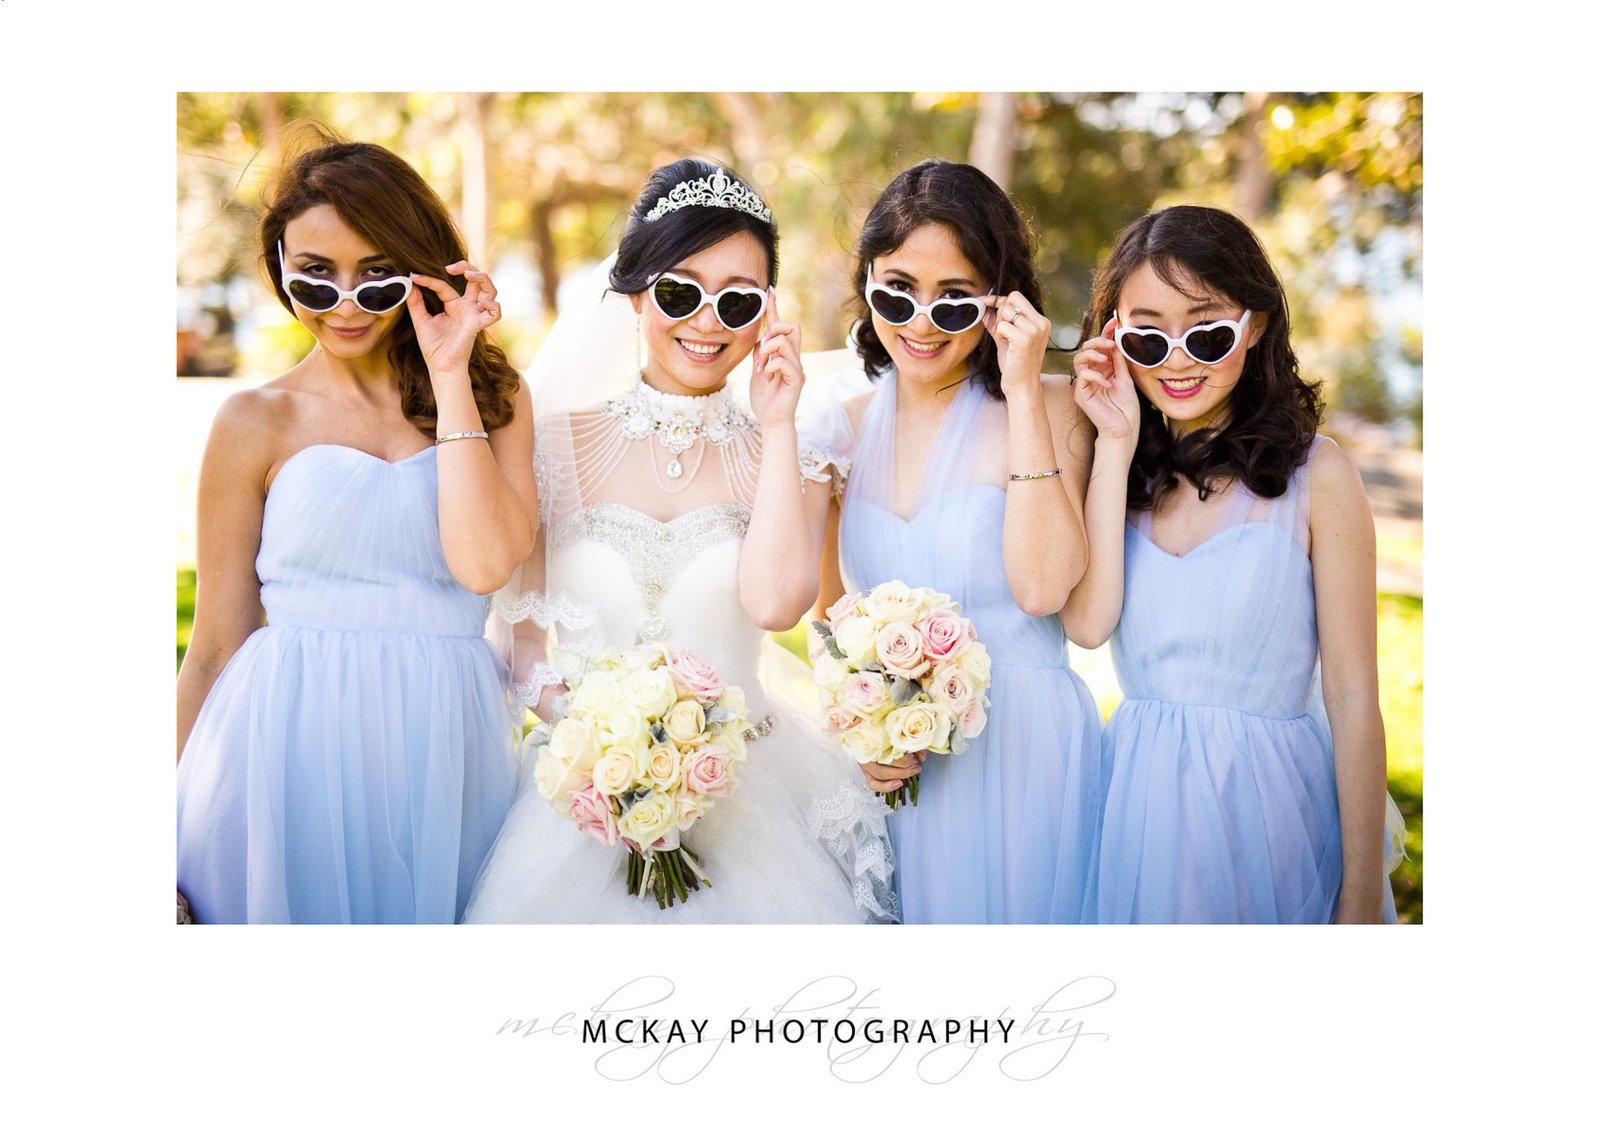 Bridesmaids with sunglasses